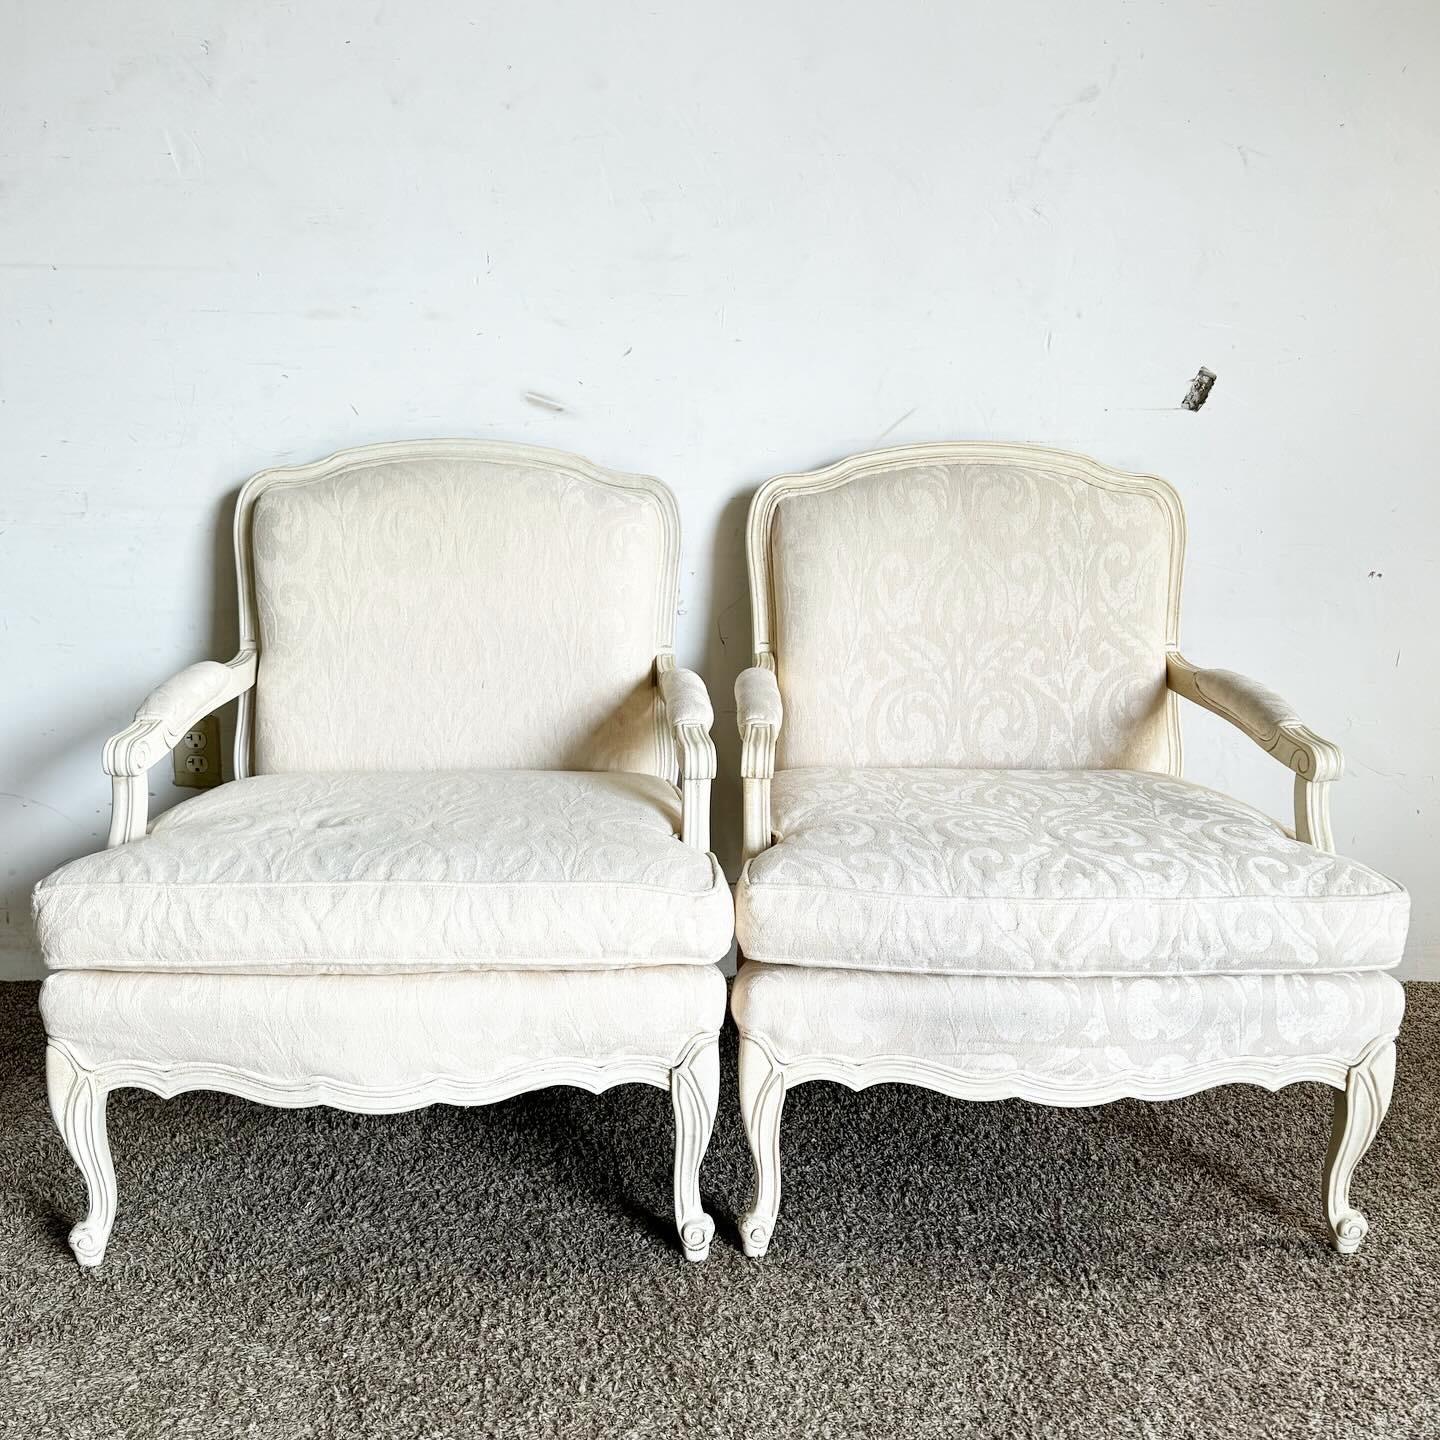 Add a touch of classic elegance to your space with these French Provincial Cream/Off White Arm Chairs. Featuring intricate detailing and a graceful silhouette, these chairs are upholstered in soft cream/off-white fabric, enhancing any decor. Perfect